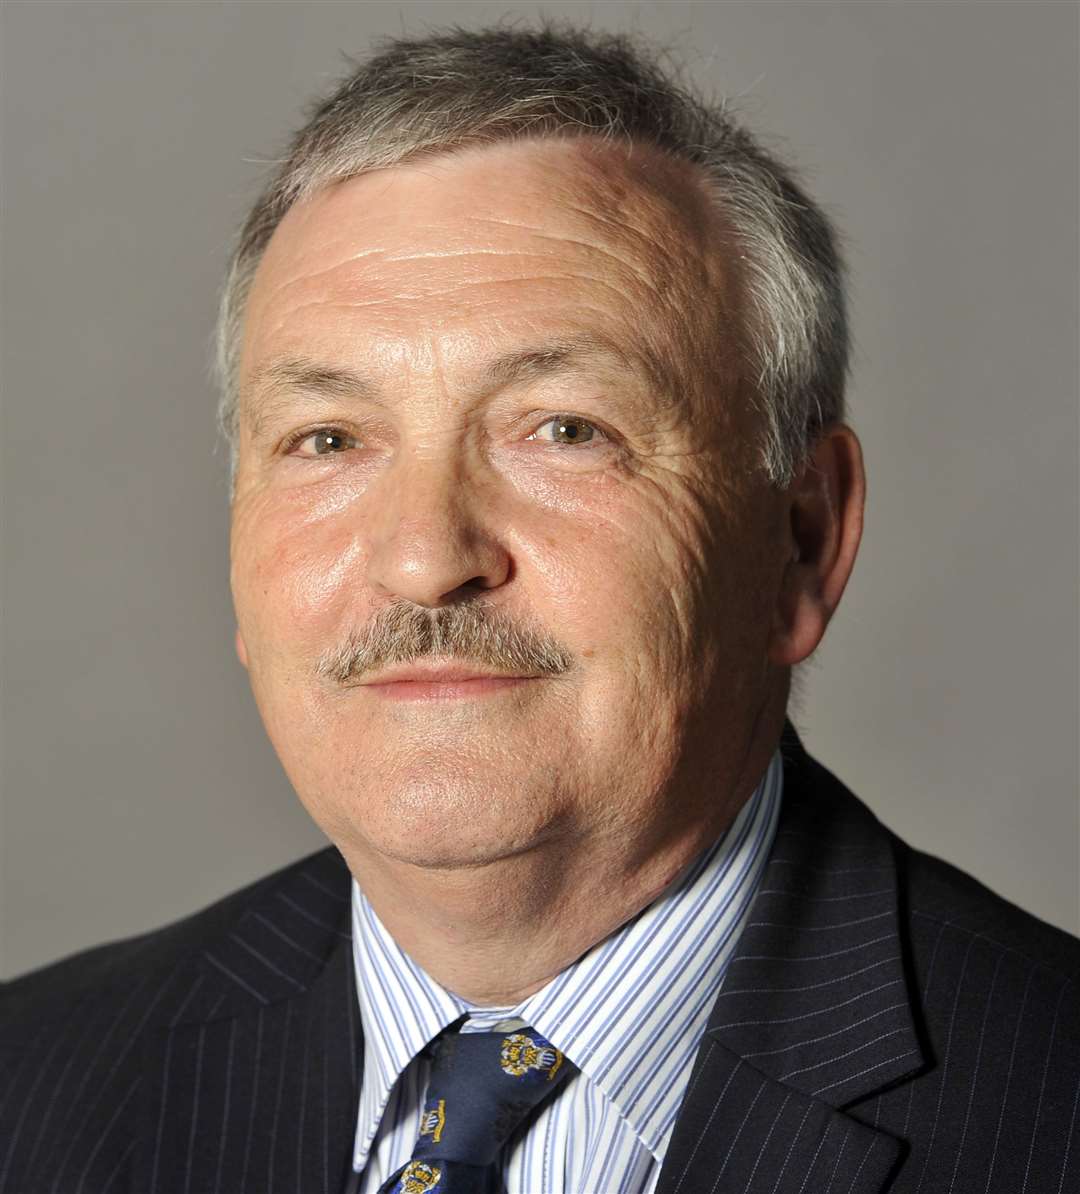 Medway Council leader Alan Jarrett has indicated there could be a hike in council tax in the Towns.